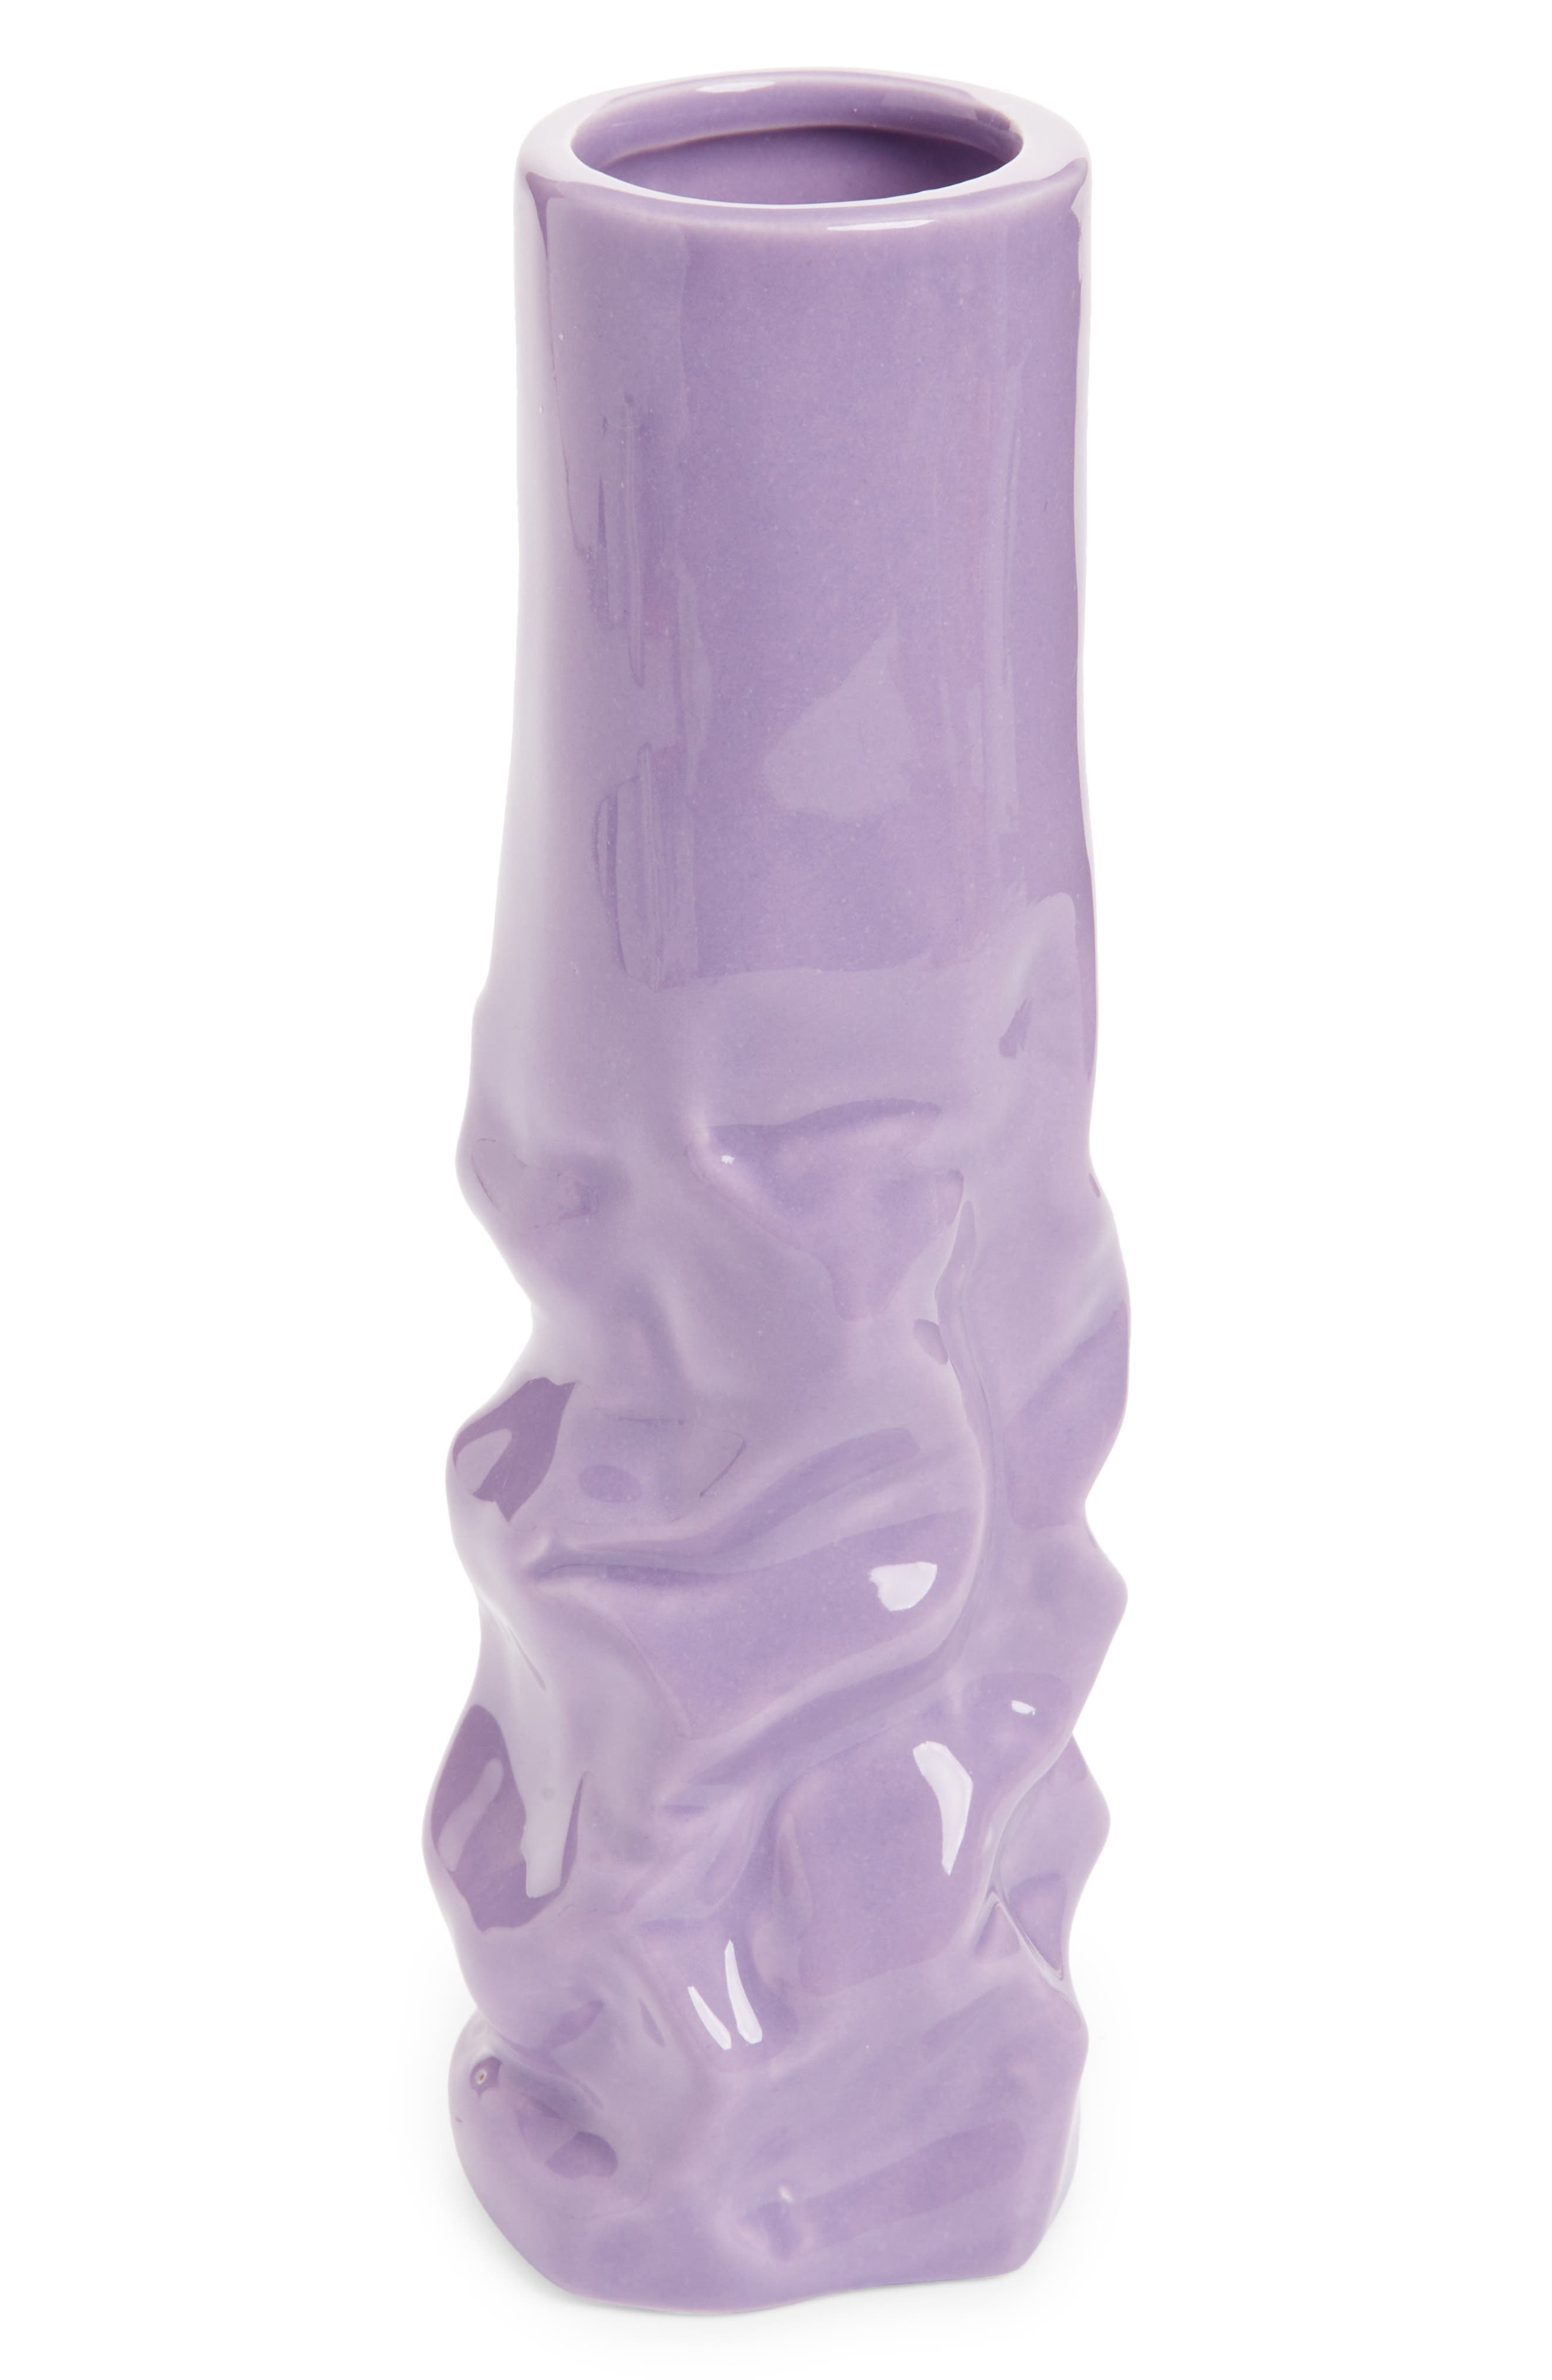 Made By Humans Crushed Tube Vase in Purple